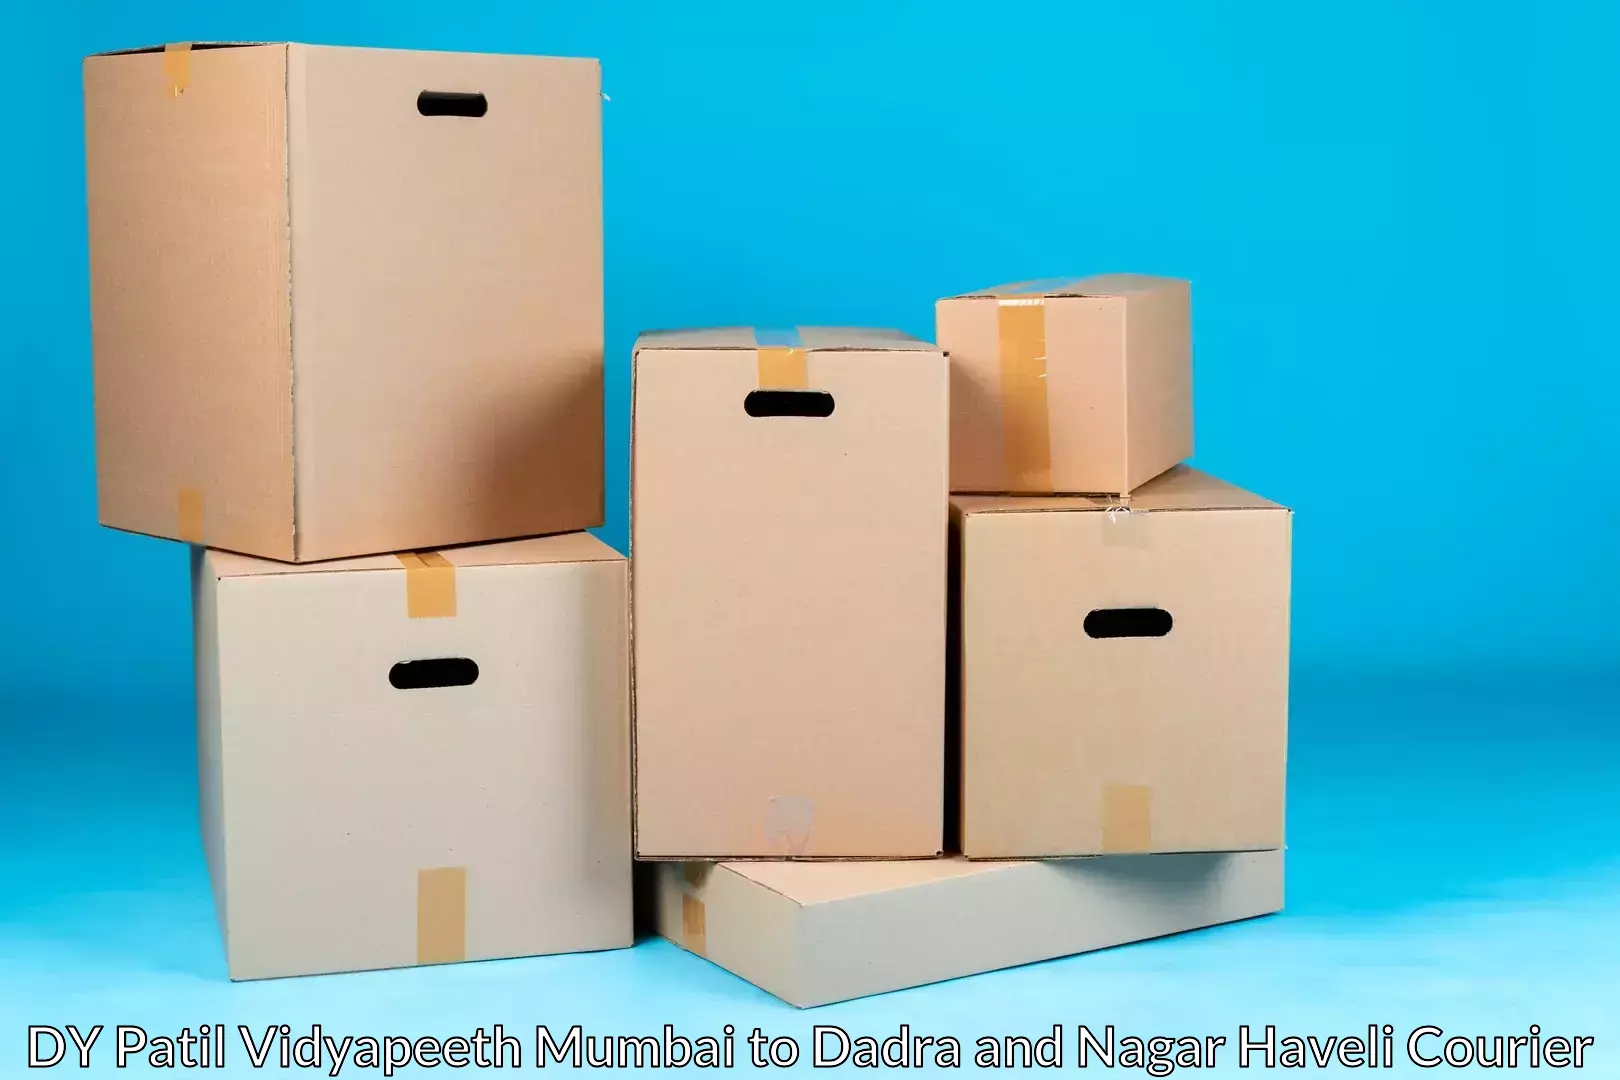 Residential relocation services DY Patil Vidyapeeth Mumbai to Dadra and Nagar Haveli